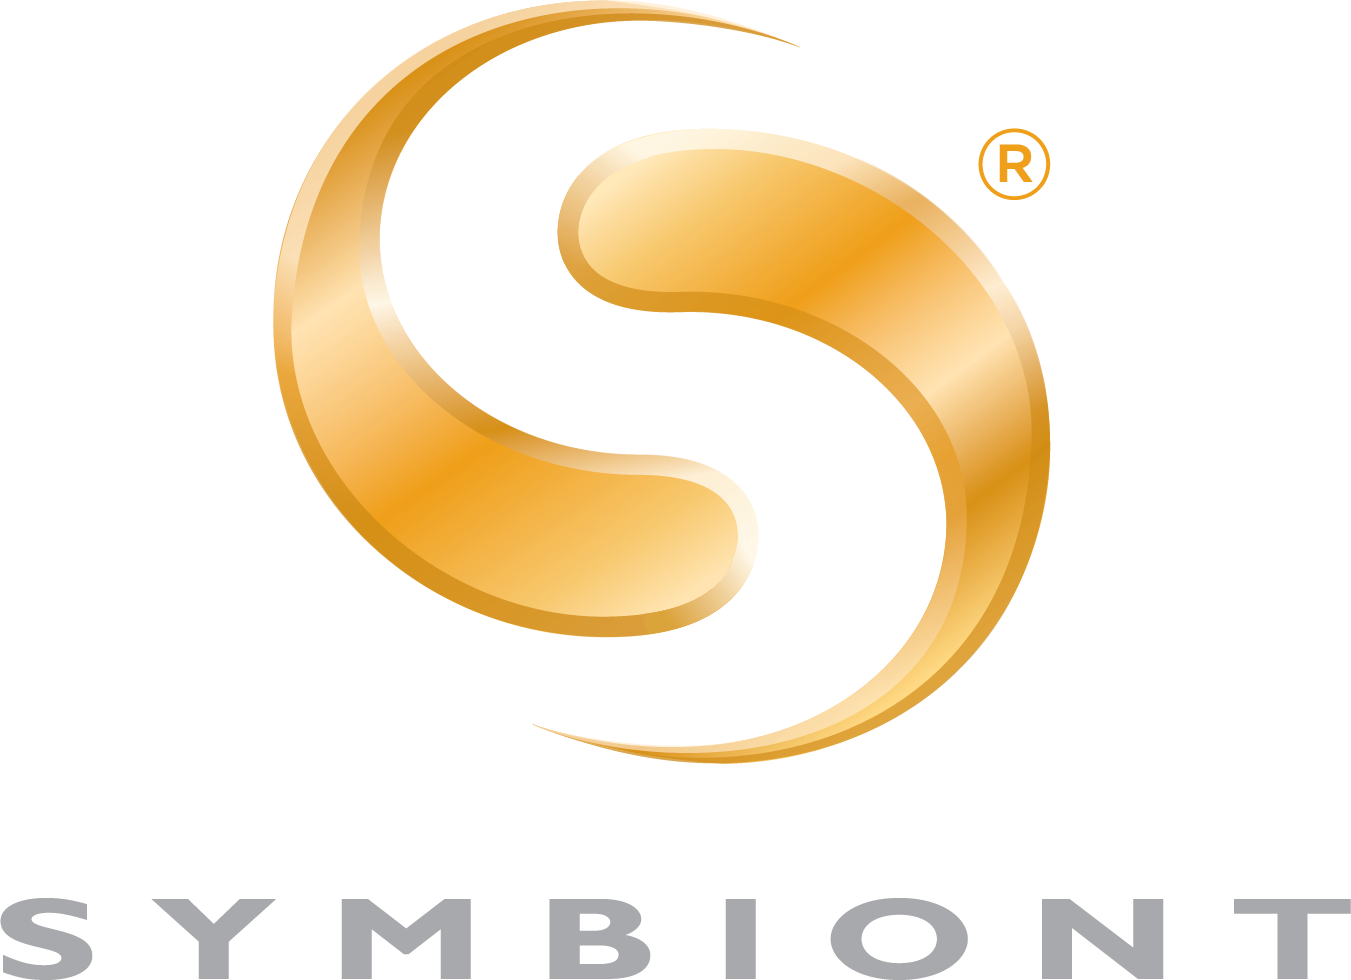 Symbiont Science, Engineering and Construction, Inc. (dba Symbiont) logo